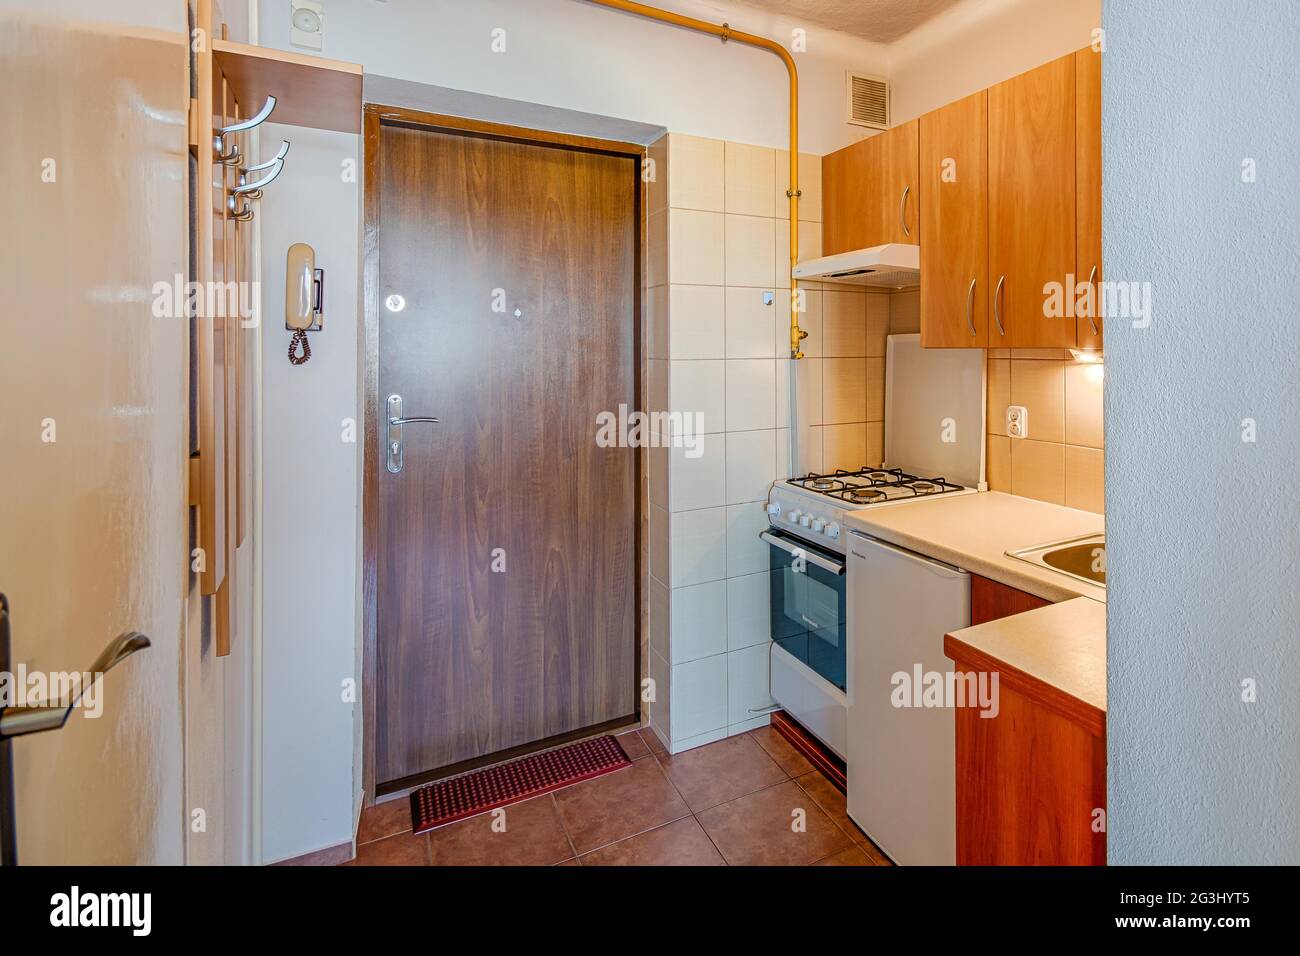 My tiny, student apartment in a small block of flats. Stock Photo